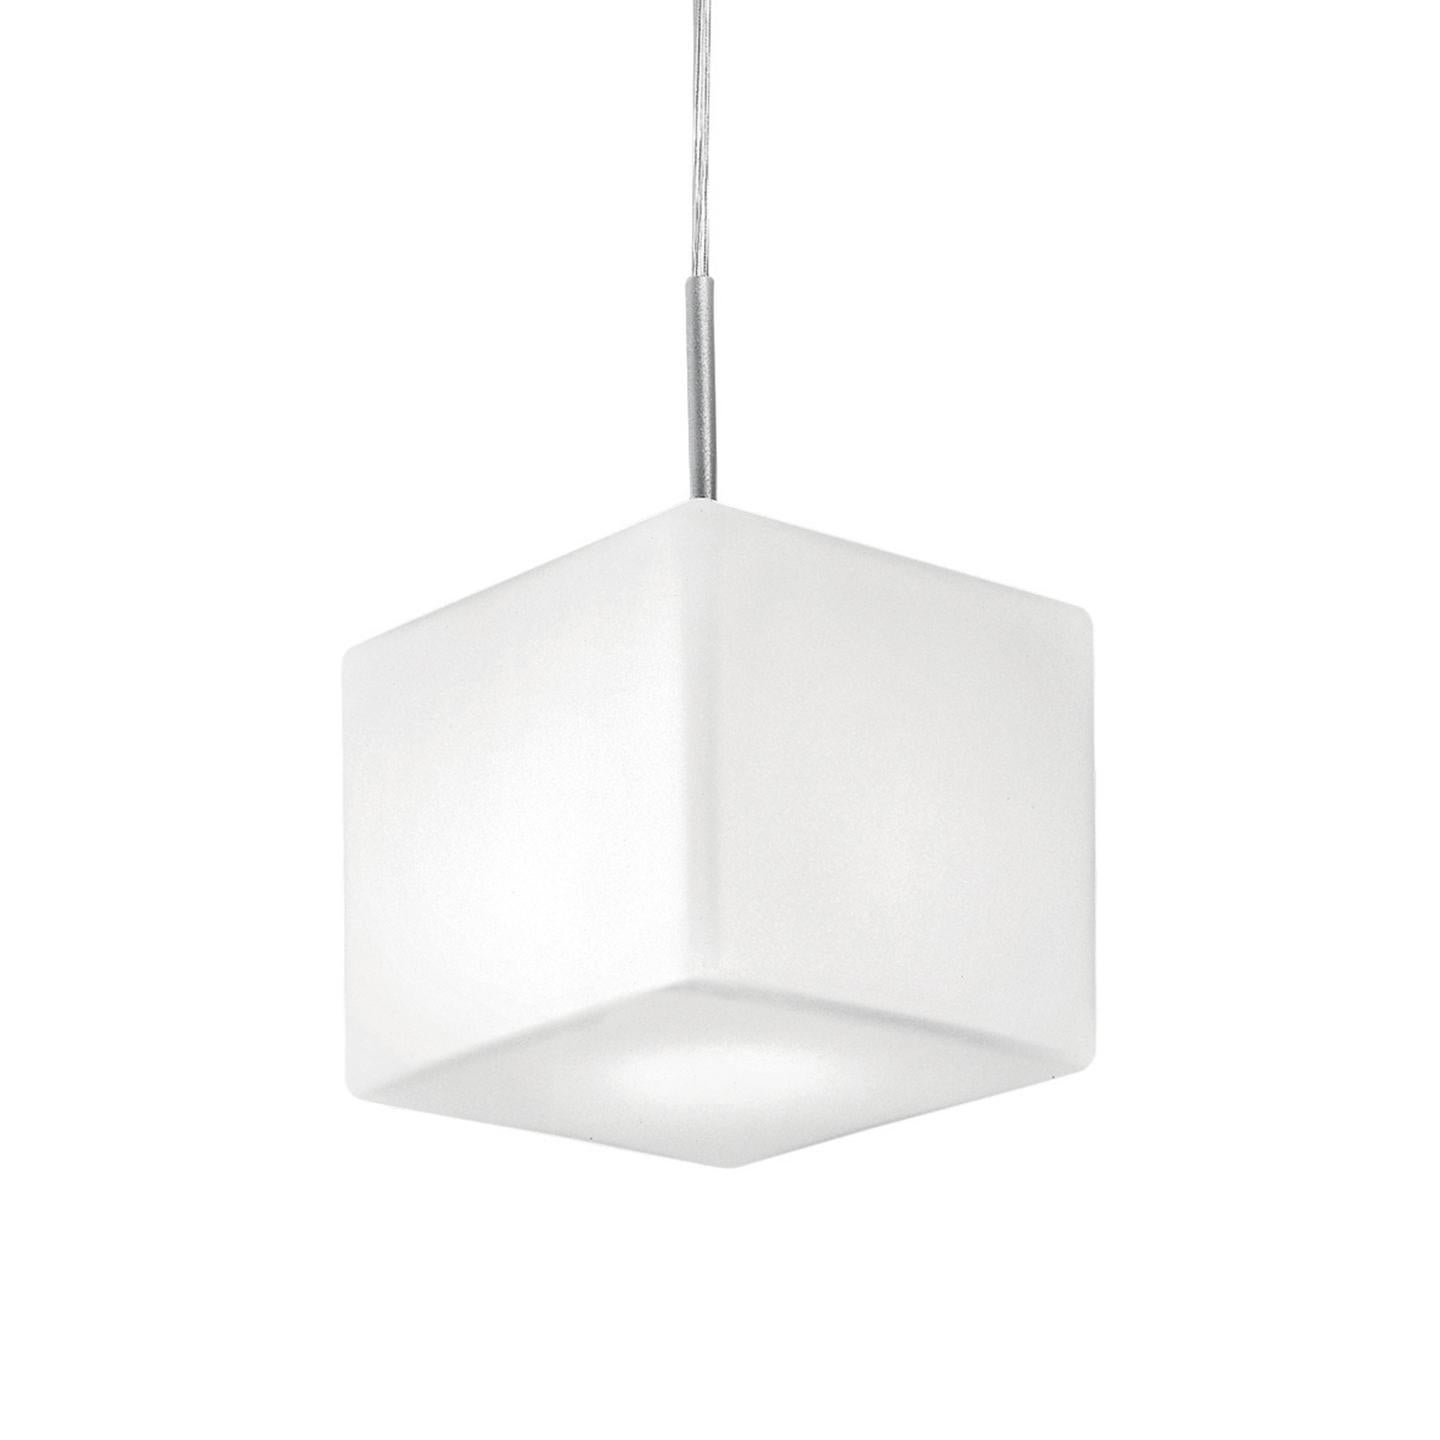 Leucos Cubi S 16 Pendant Light in Satin White and Gray by Design Lab For Sale